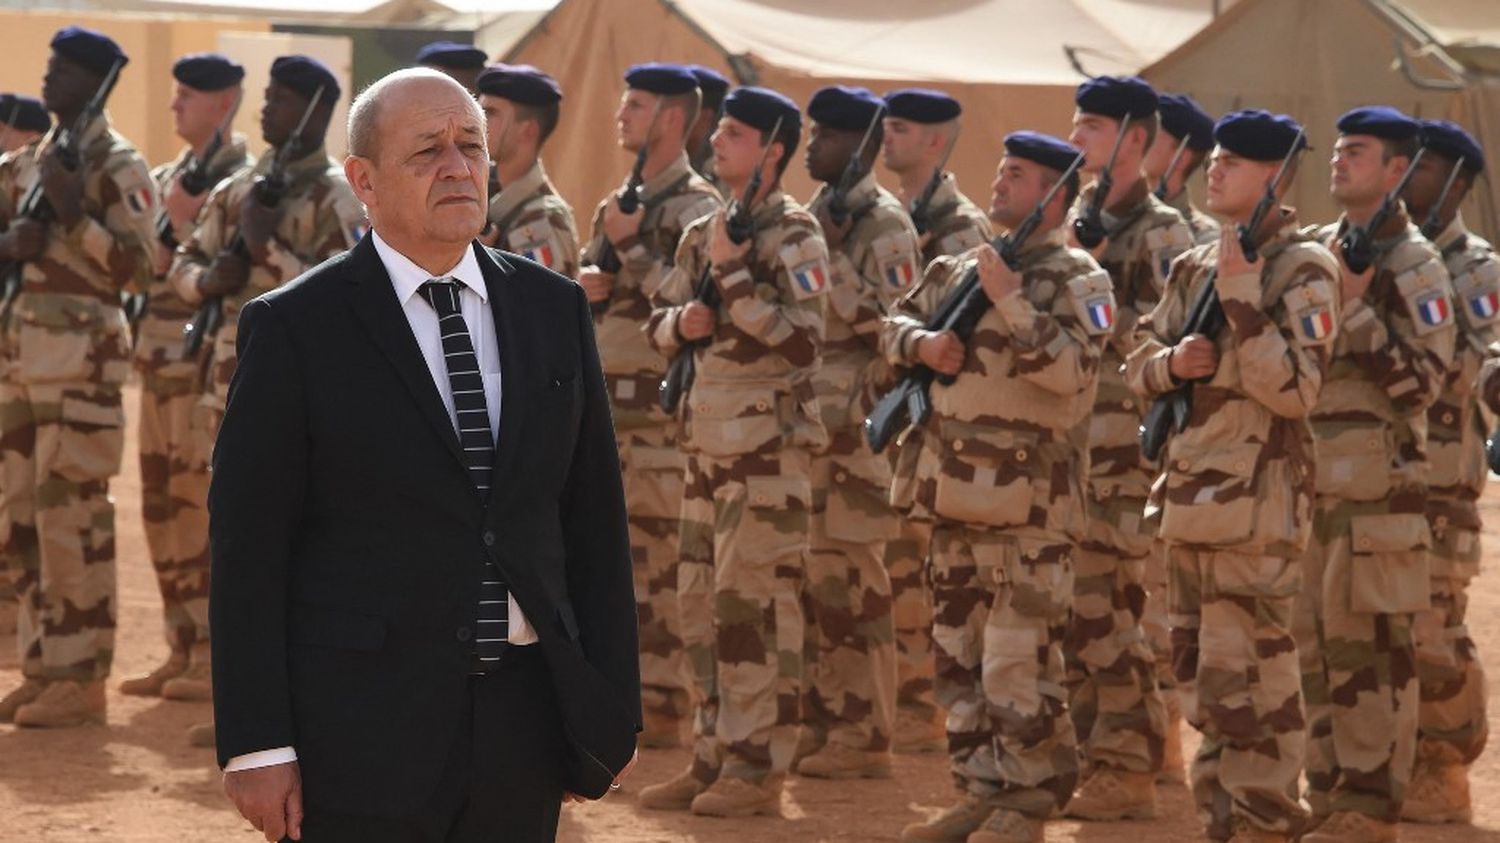 Mali: Foreign Minister Jean-Yves Le Drian summoned by the courts
